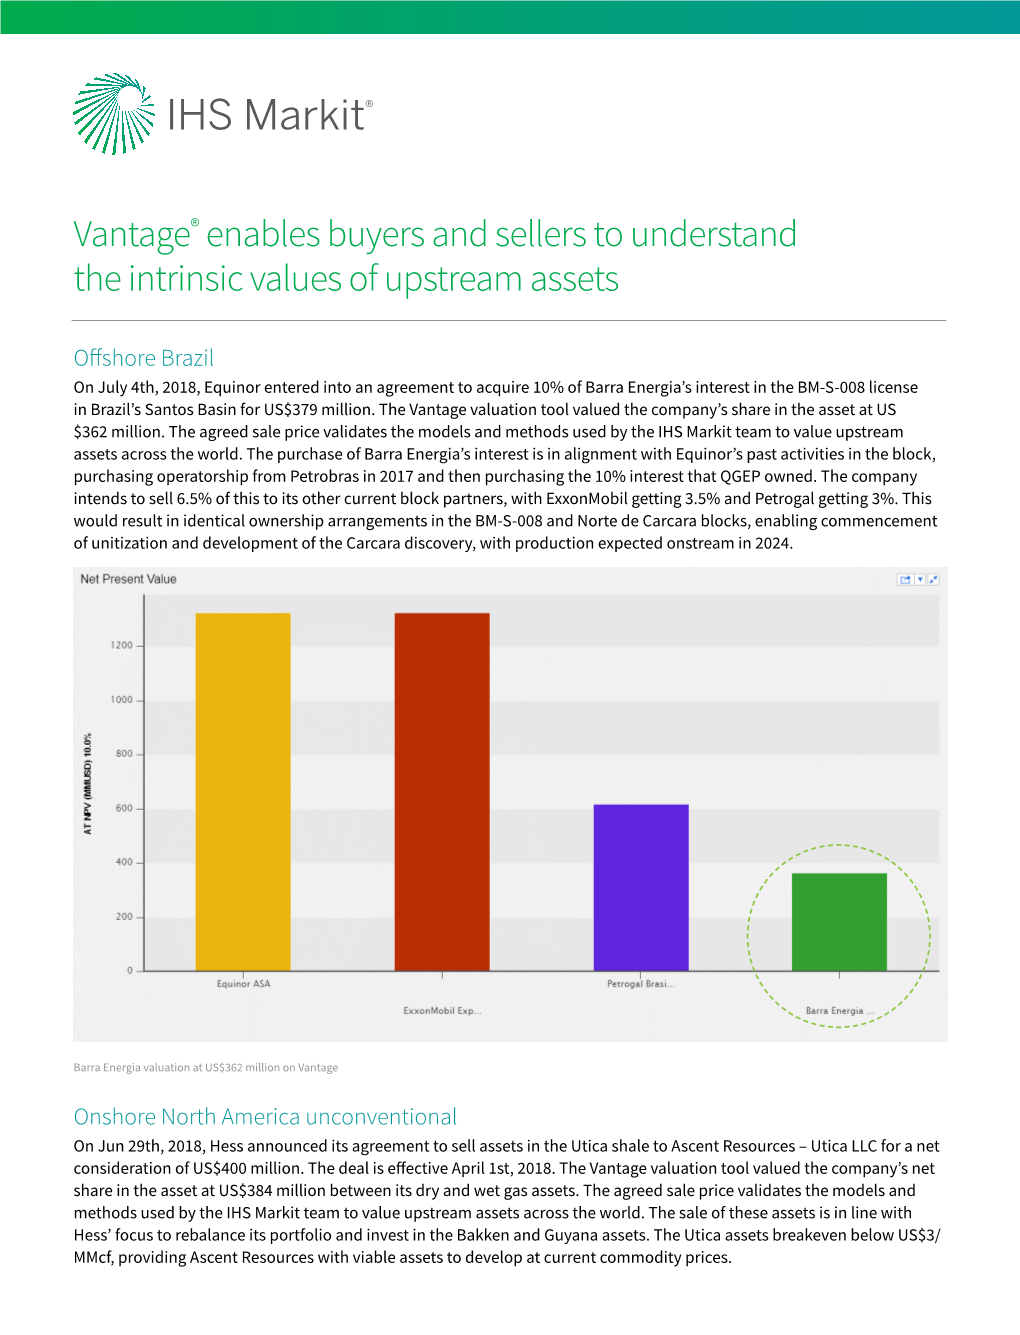 Vantage® Enables Buyers and Sellers to Understand the Intrinsic Values of Upstream Assets